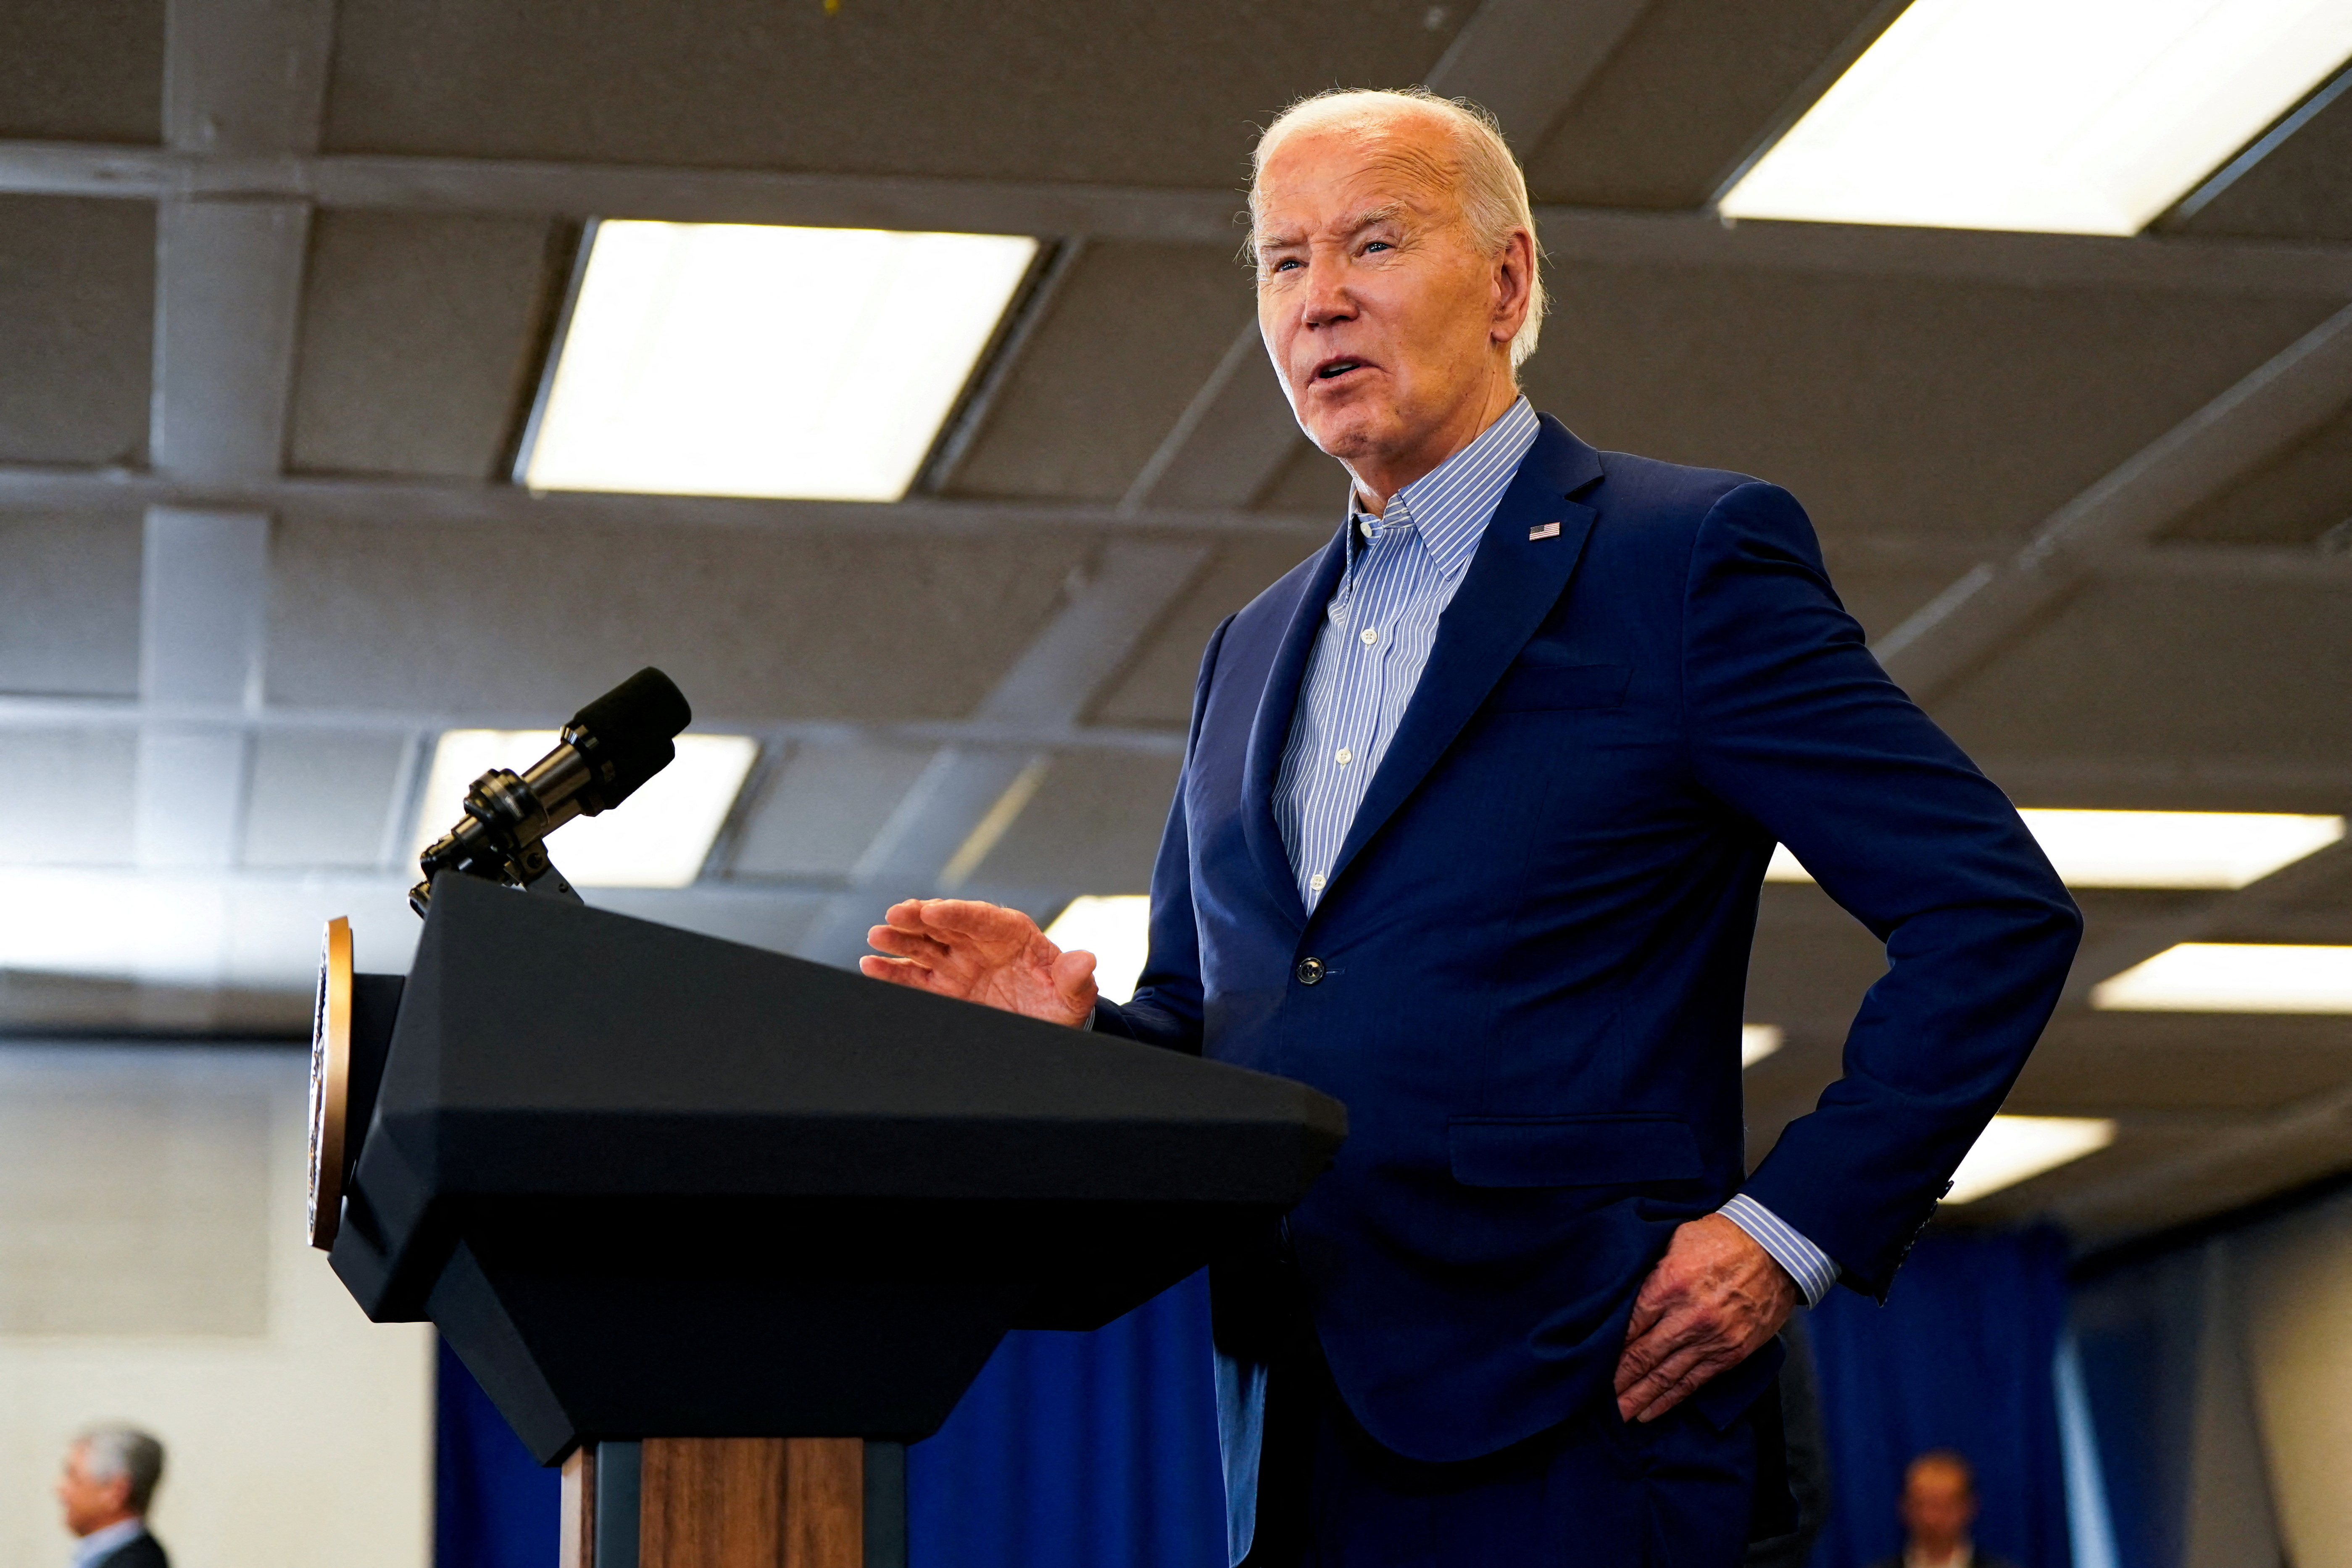 U.S. President Joe Biden delivers remarks at United Steelworkers headquarters in Pittsburgh